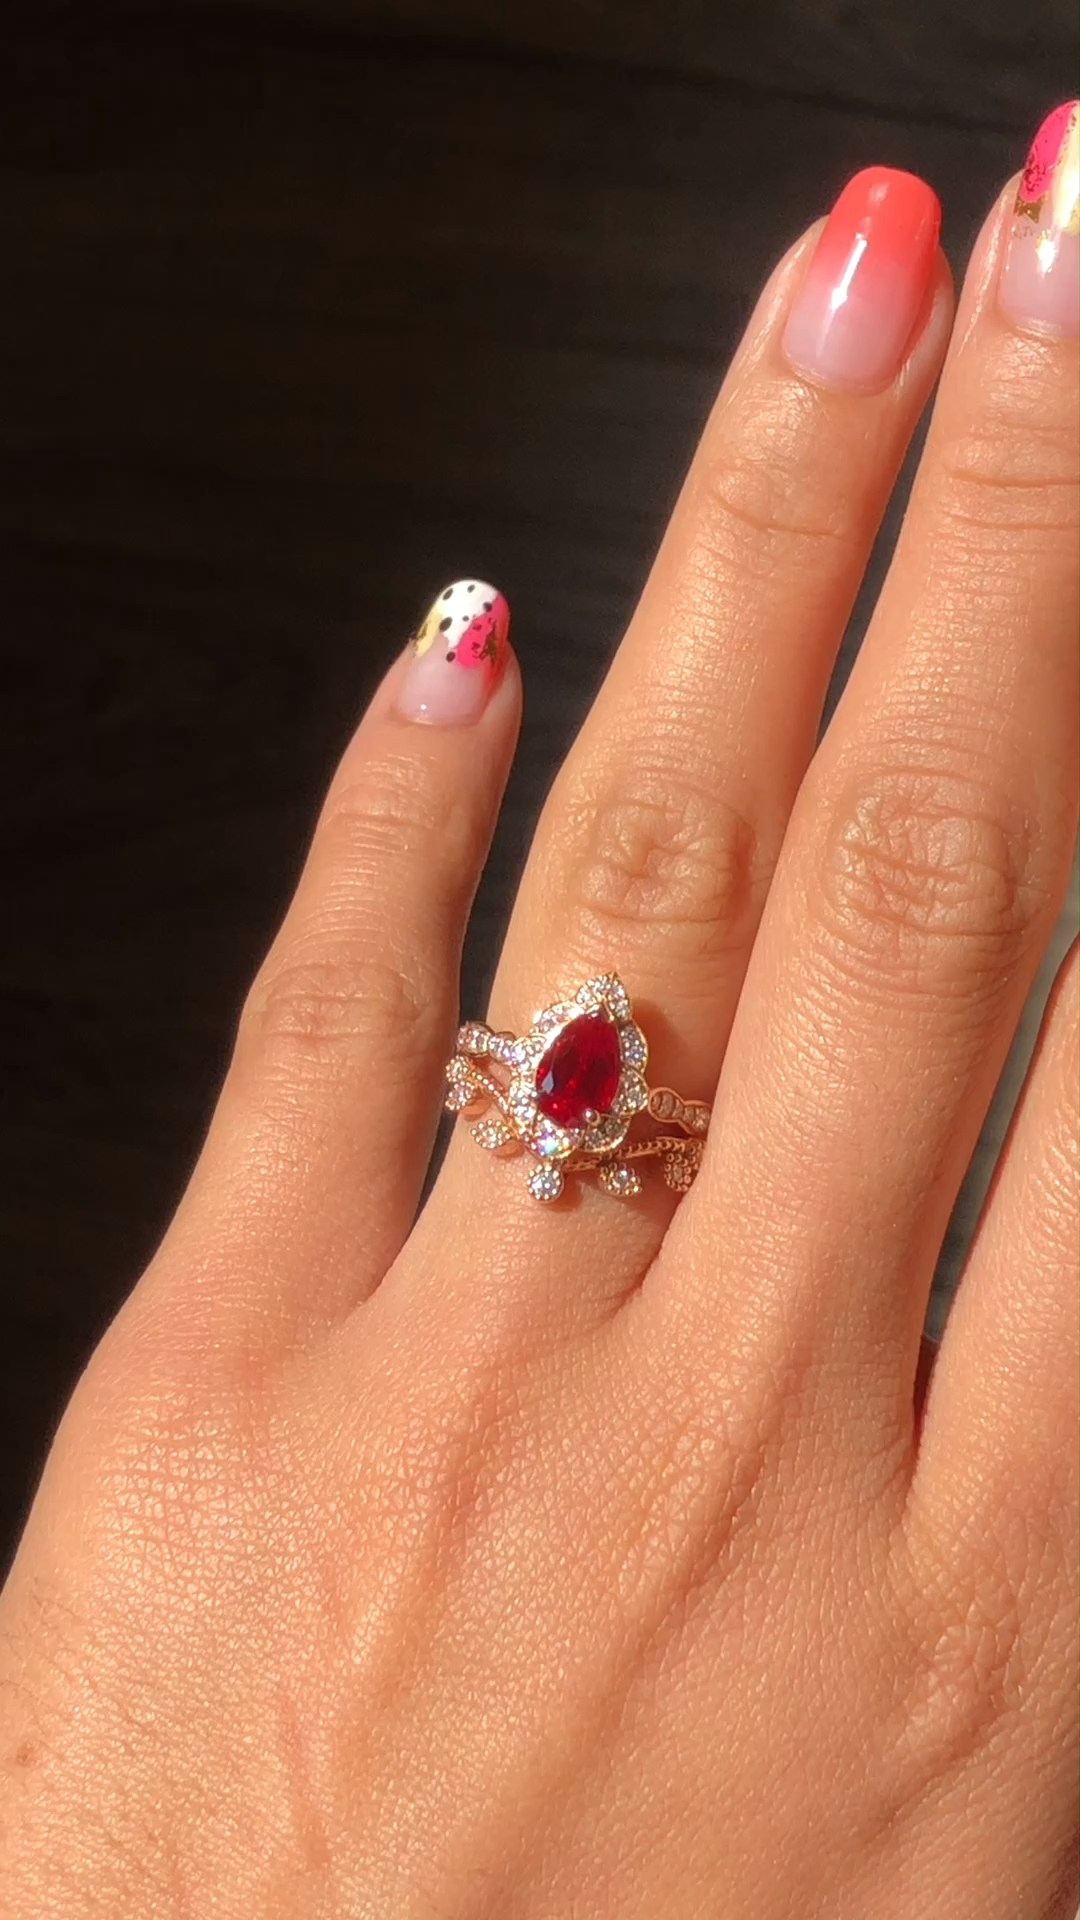 Vintage Inspired Ruby Bridal Ring Set by La More Design -   15 wedding Inspiration rings ideas